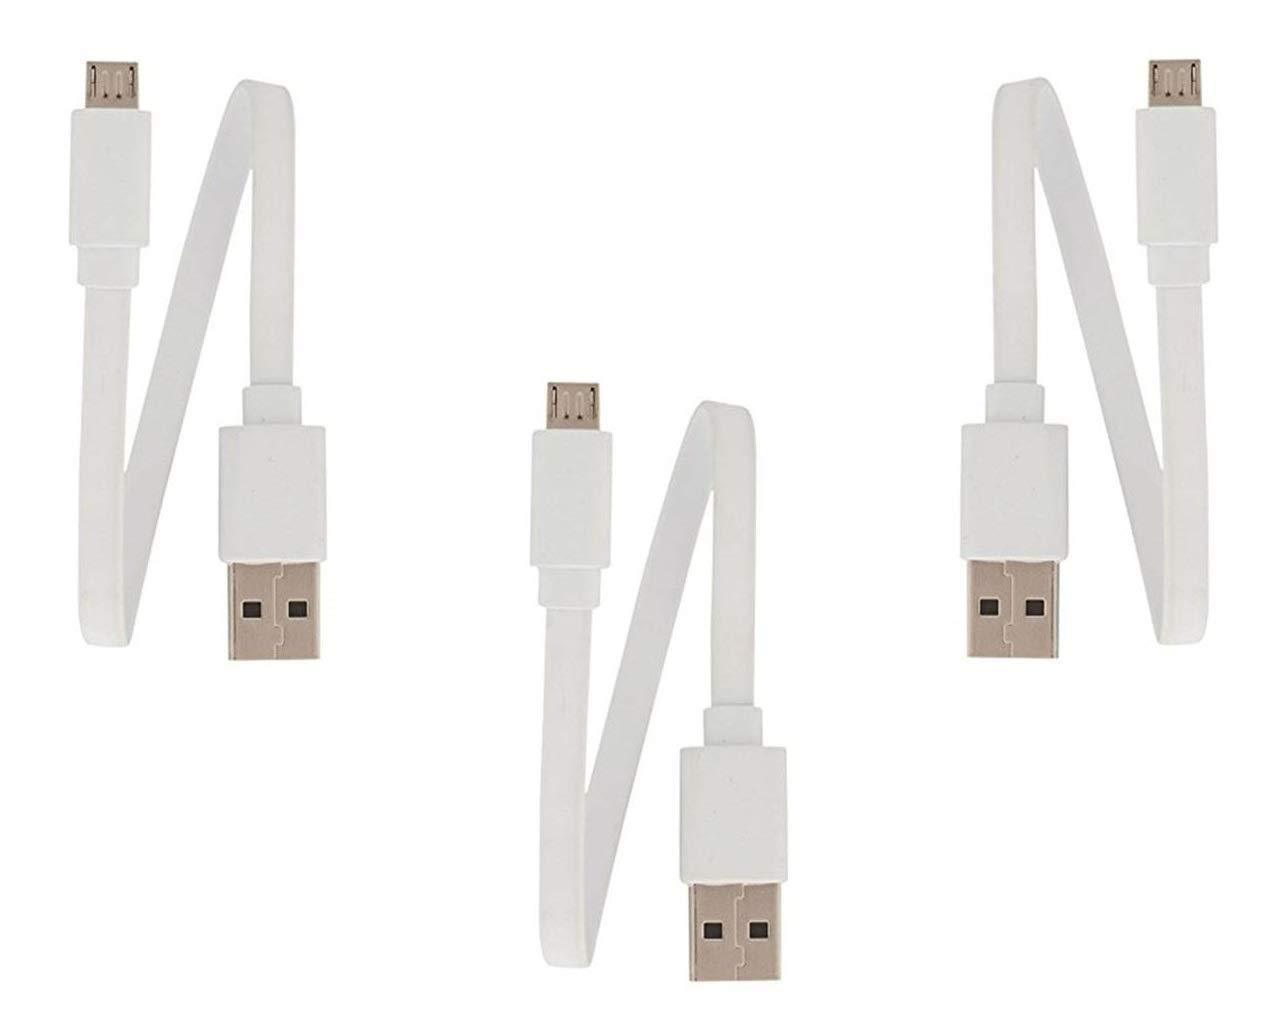 high speed power bank micro usb charging cable short flat android cable for all android smartphones devices and power bank